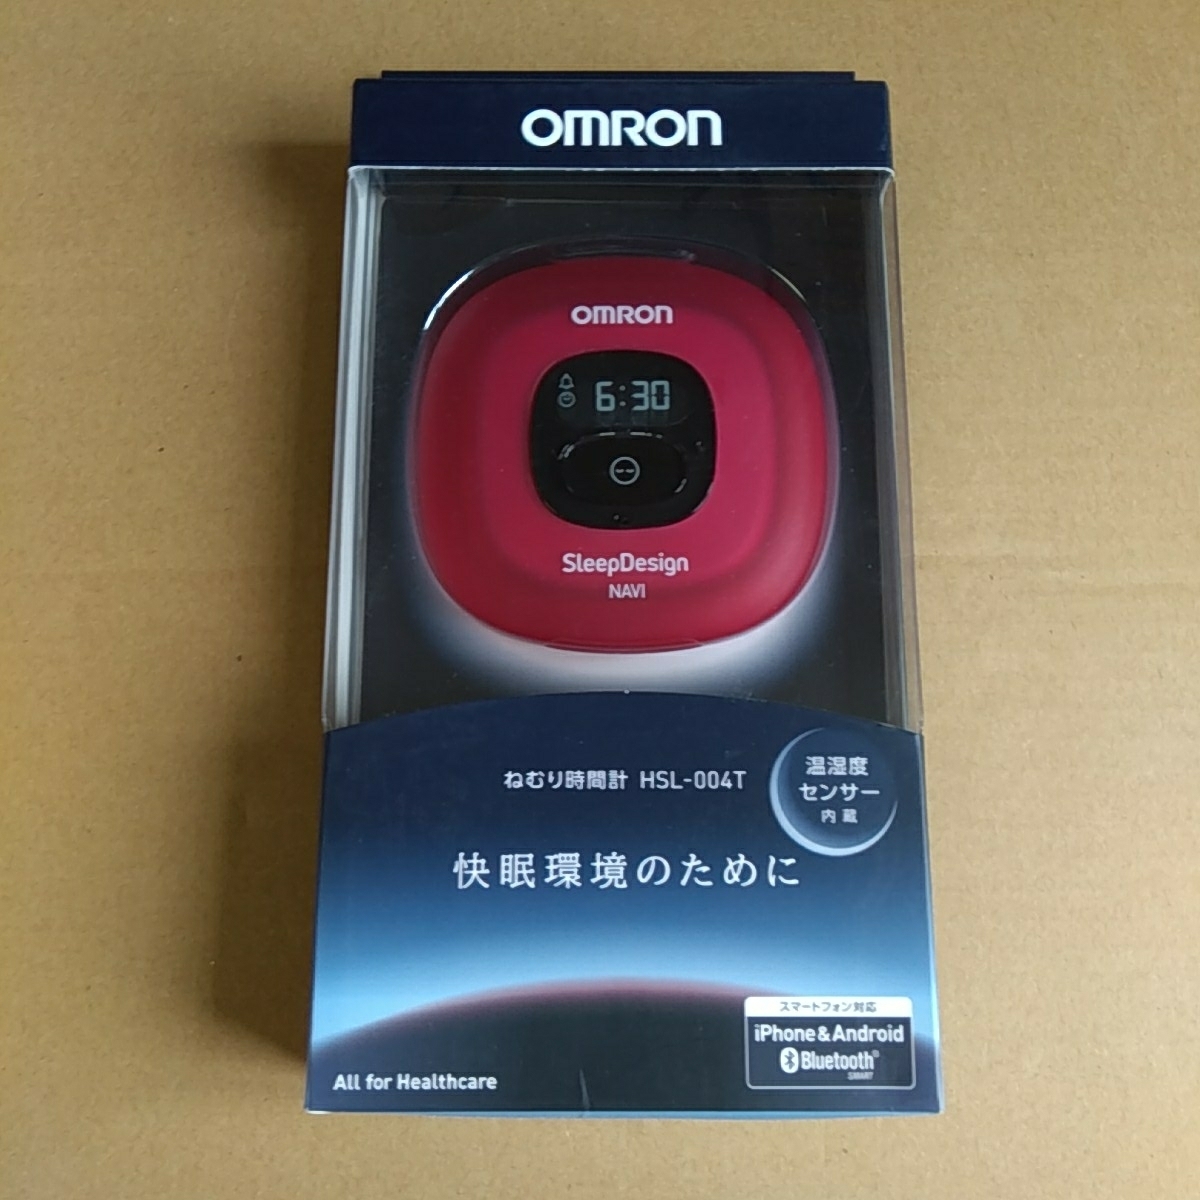 OMRON HSL-004T 睡眠計 ねむり時間計 レッド